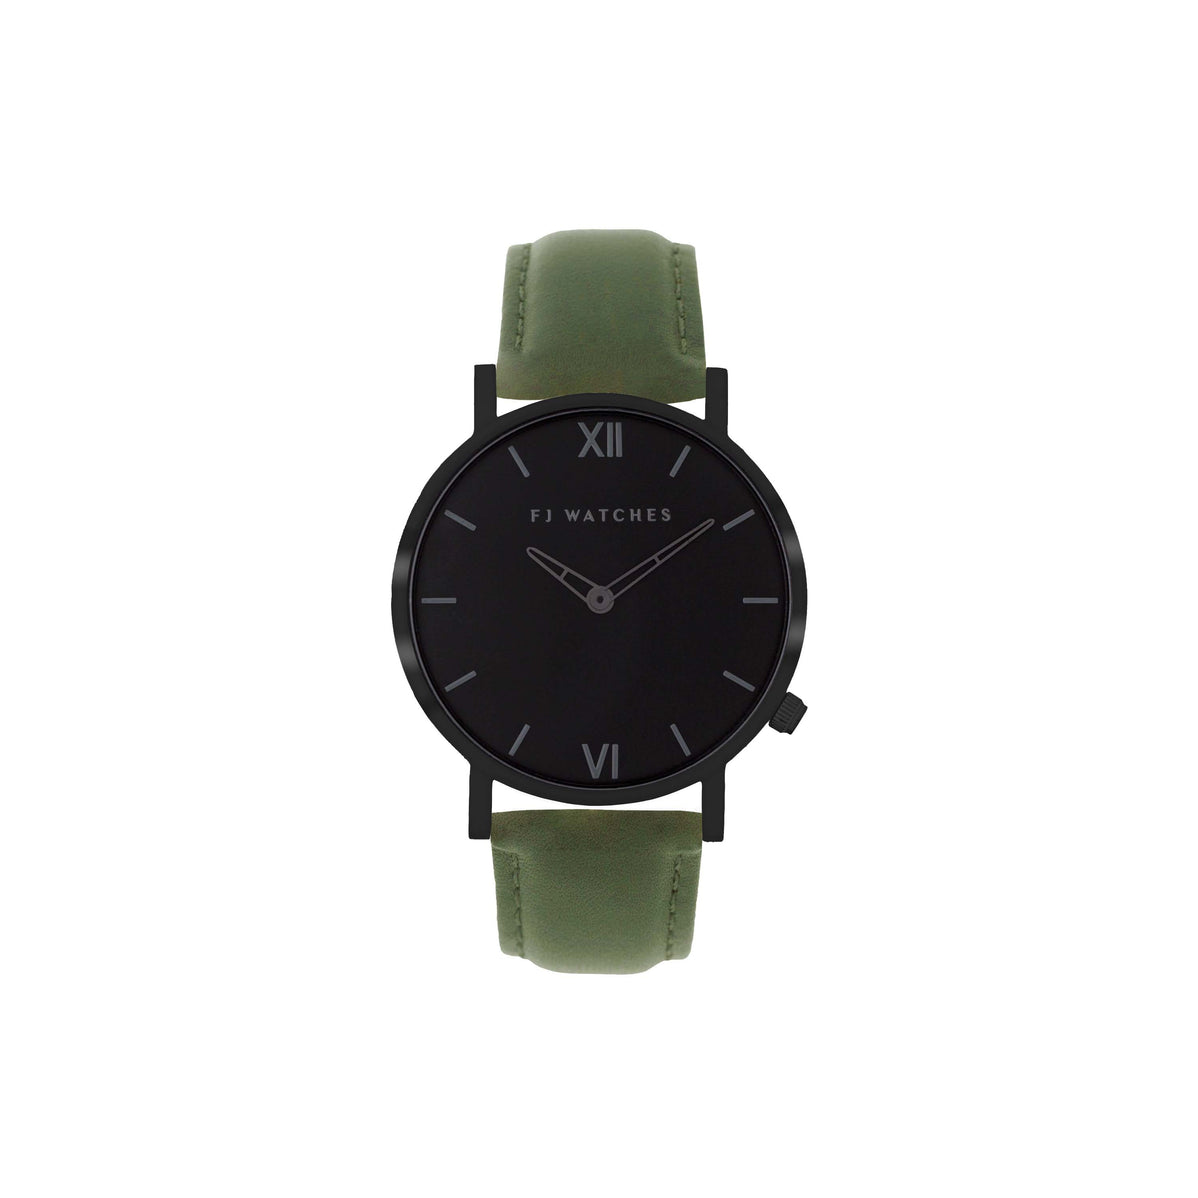 FJ Watches Dark moon all black watch for men 42mm with leather strap minimalist olive green